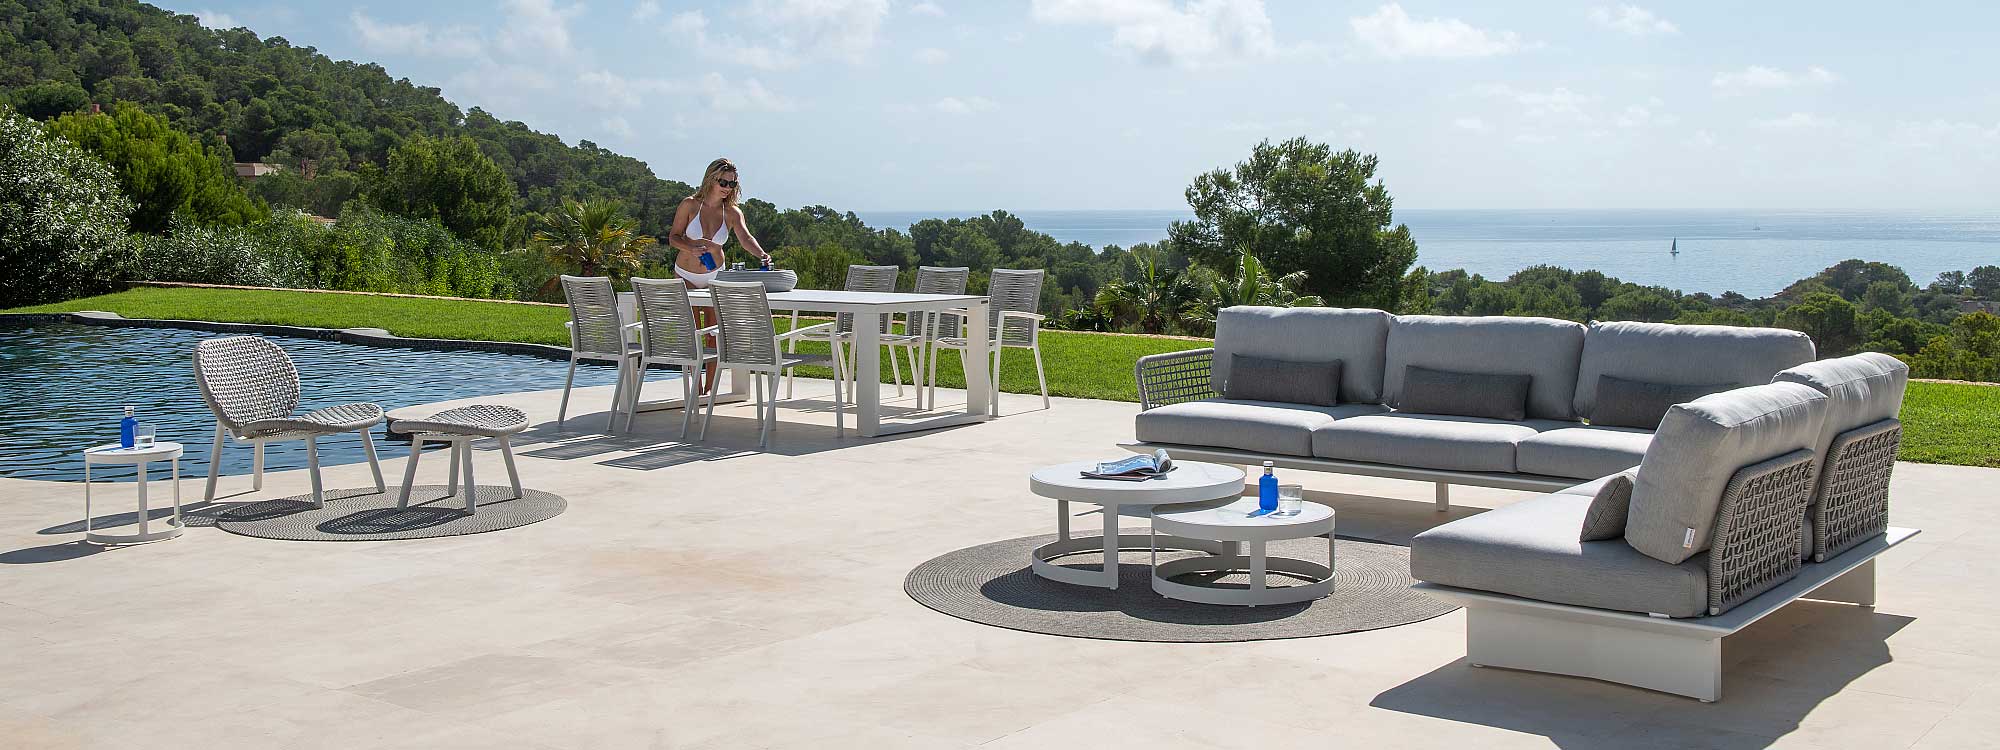 Image of Arbon white garden corner sofa, together with Vigo XL extending table and Sevilla chairs on sunny poolside with lawn, woodland and blue sea and sky in the background